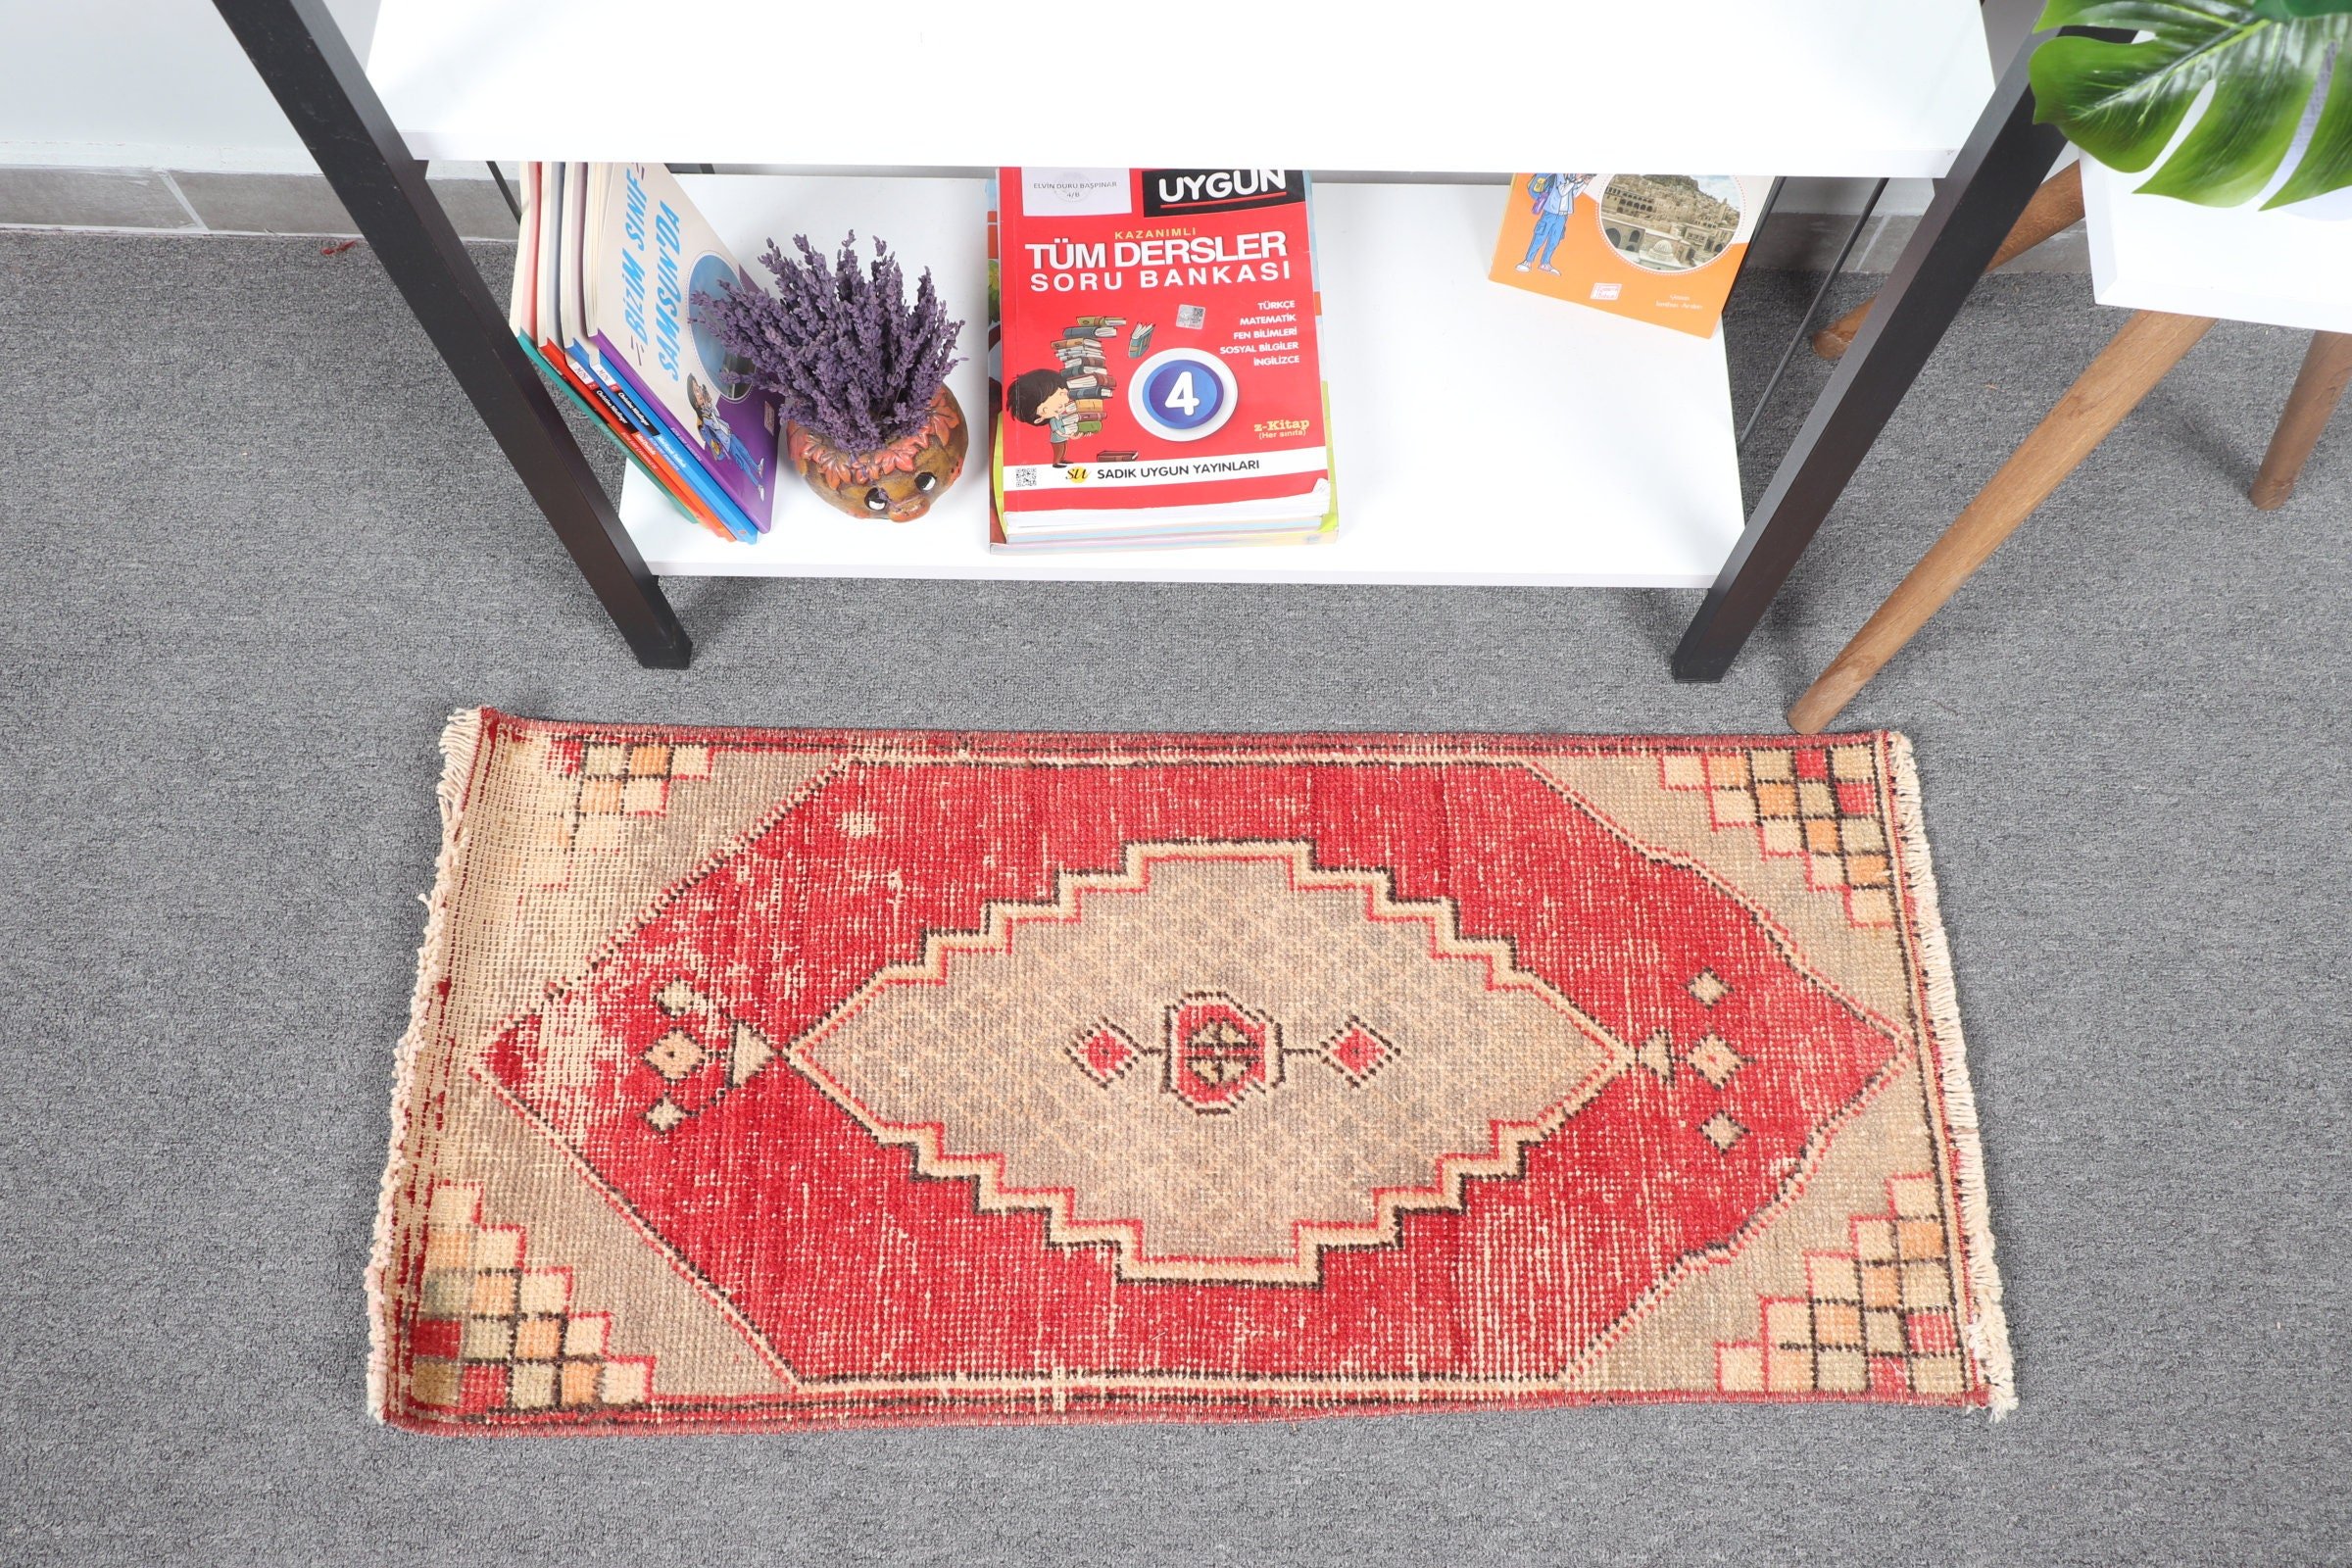 Vintage Rug, Oushak Rug, Red Moroccan Rug, Turkish Rug, Kitchen Rug, 1.4x3.1 ft Small Rugs, Car Mat Rug, Rugs for Entry, Anatolian Rug